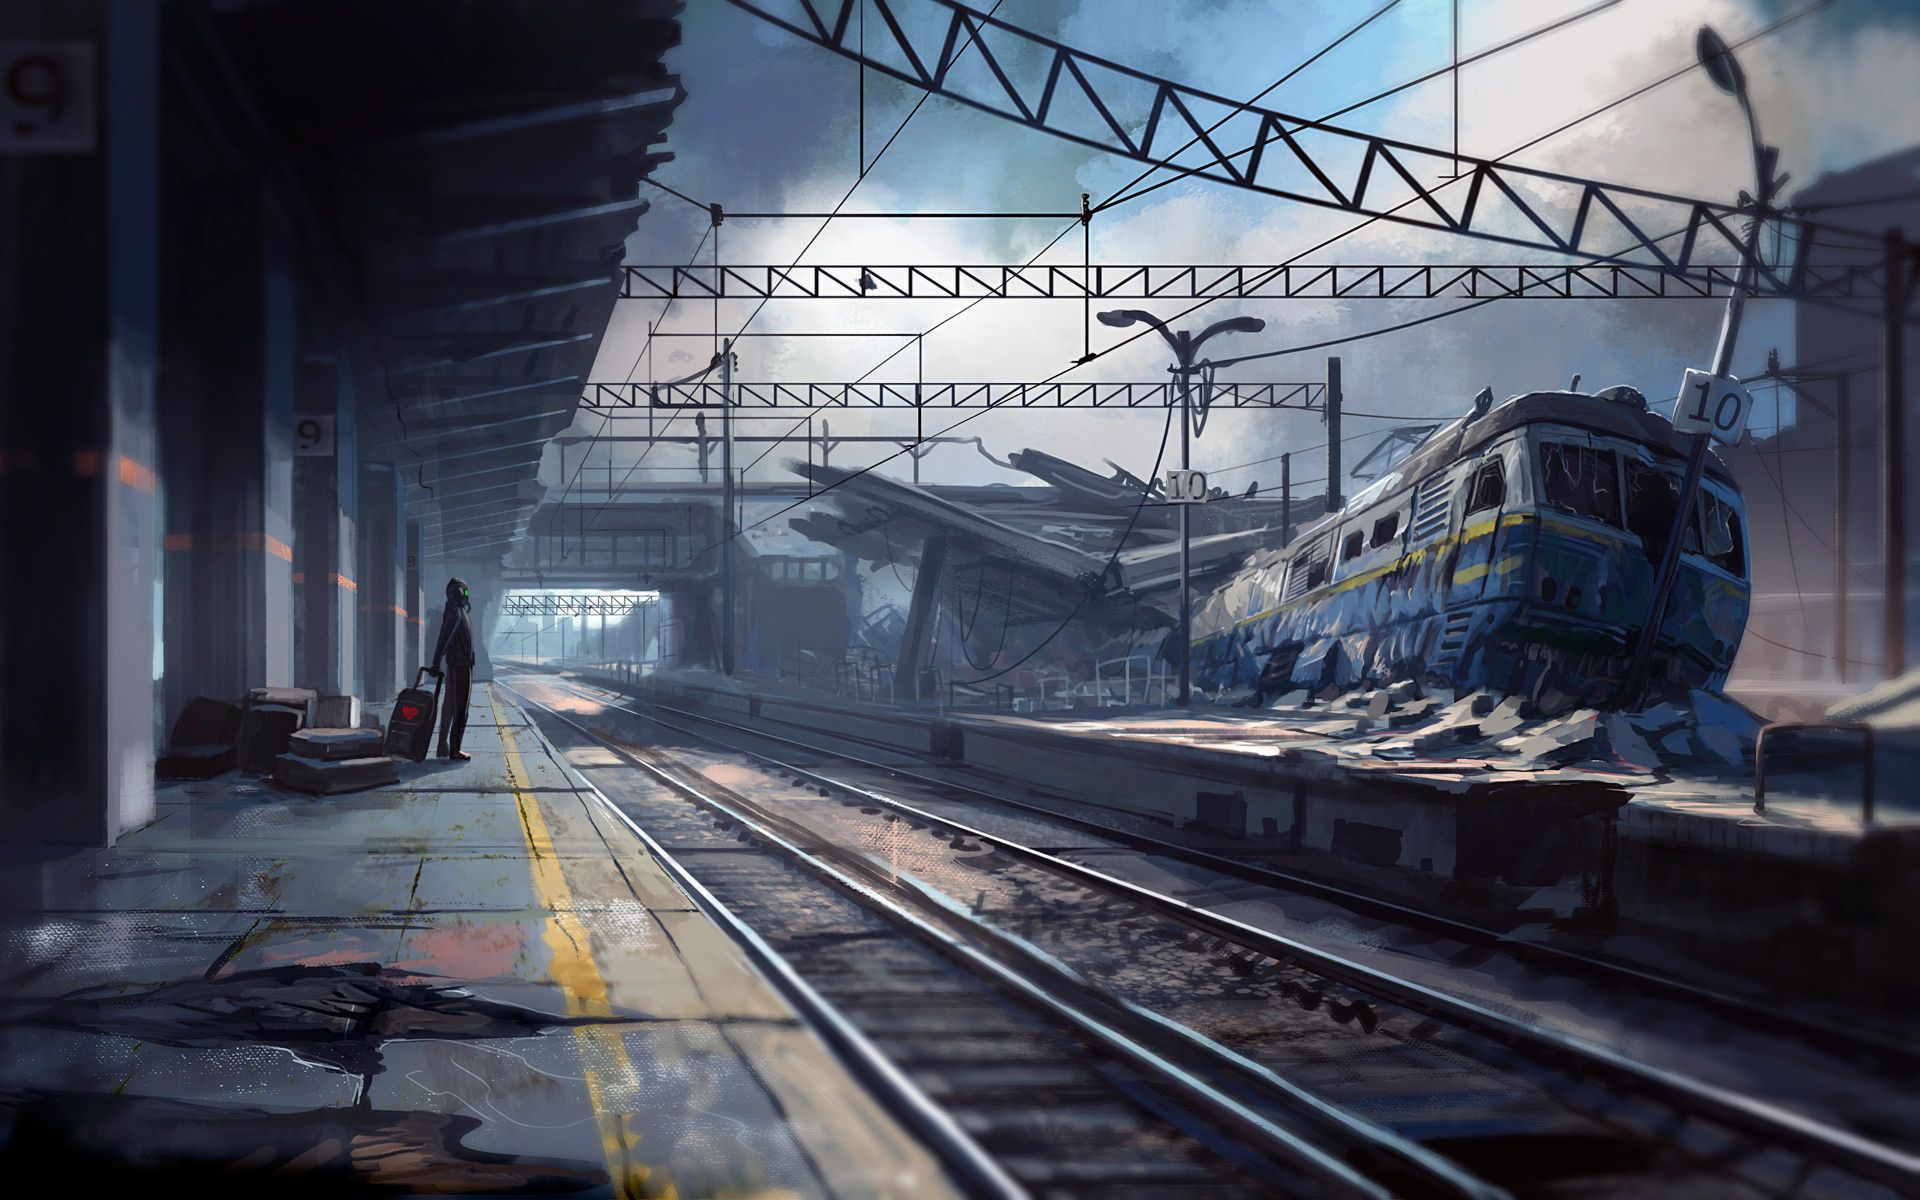 1920x1200 Download Wallpaper Train Railroad Station Railway 1920x1200 The Accident At The Railway Station